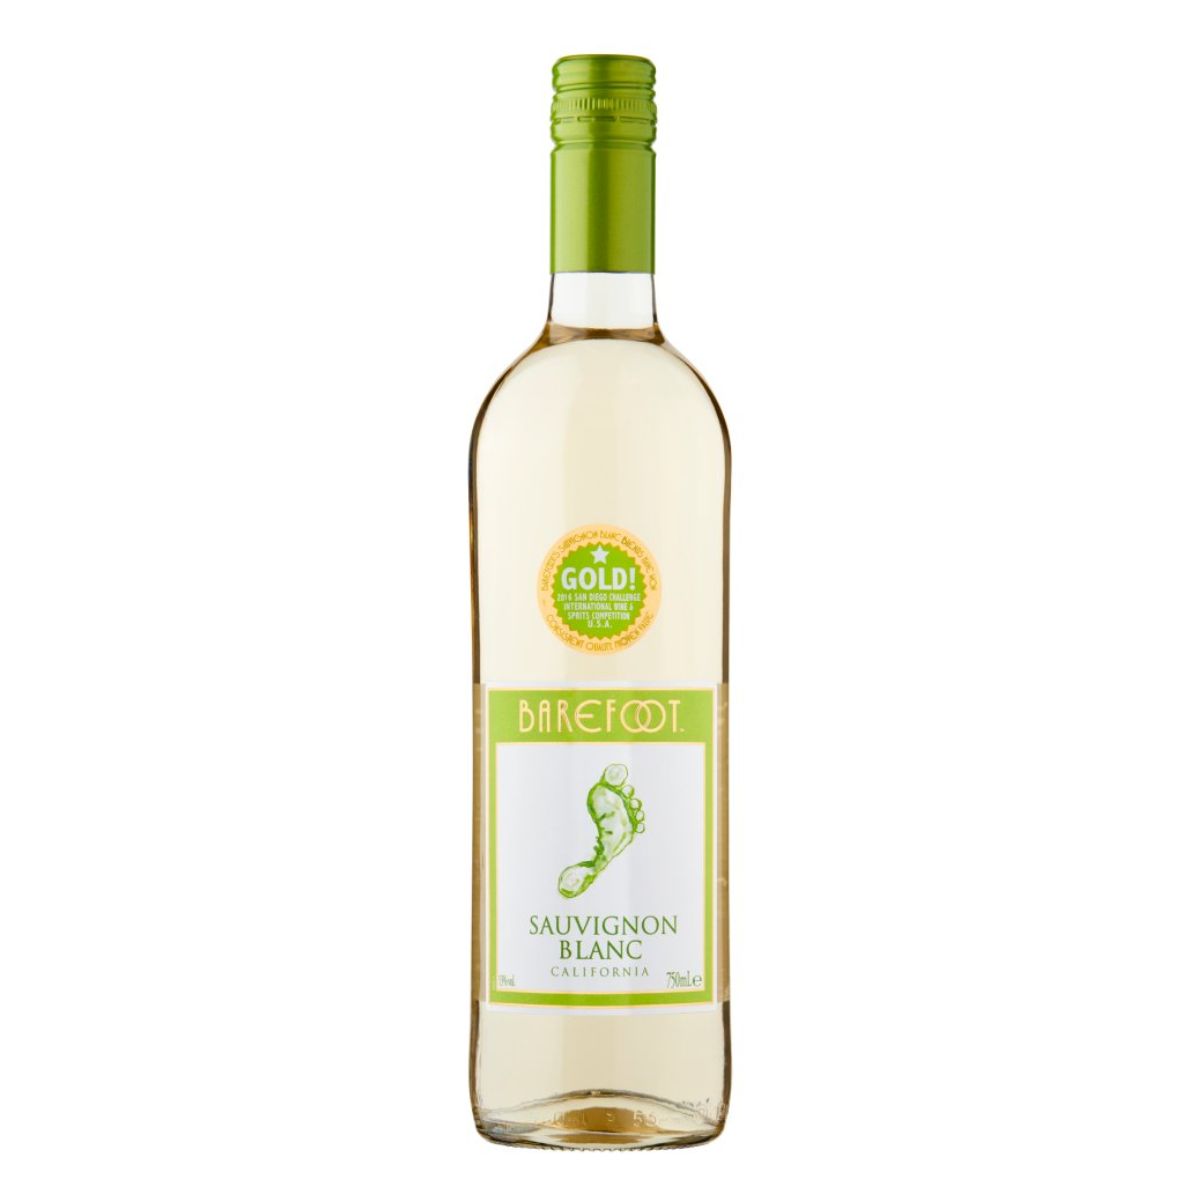 A bottle of Barefoot - Sauvignon Blanc White Wine (13% ABV) - 750ml on a white background.